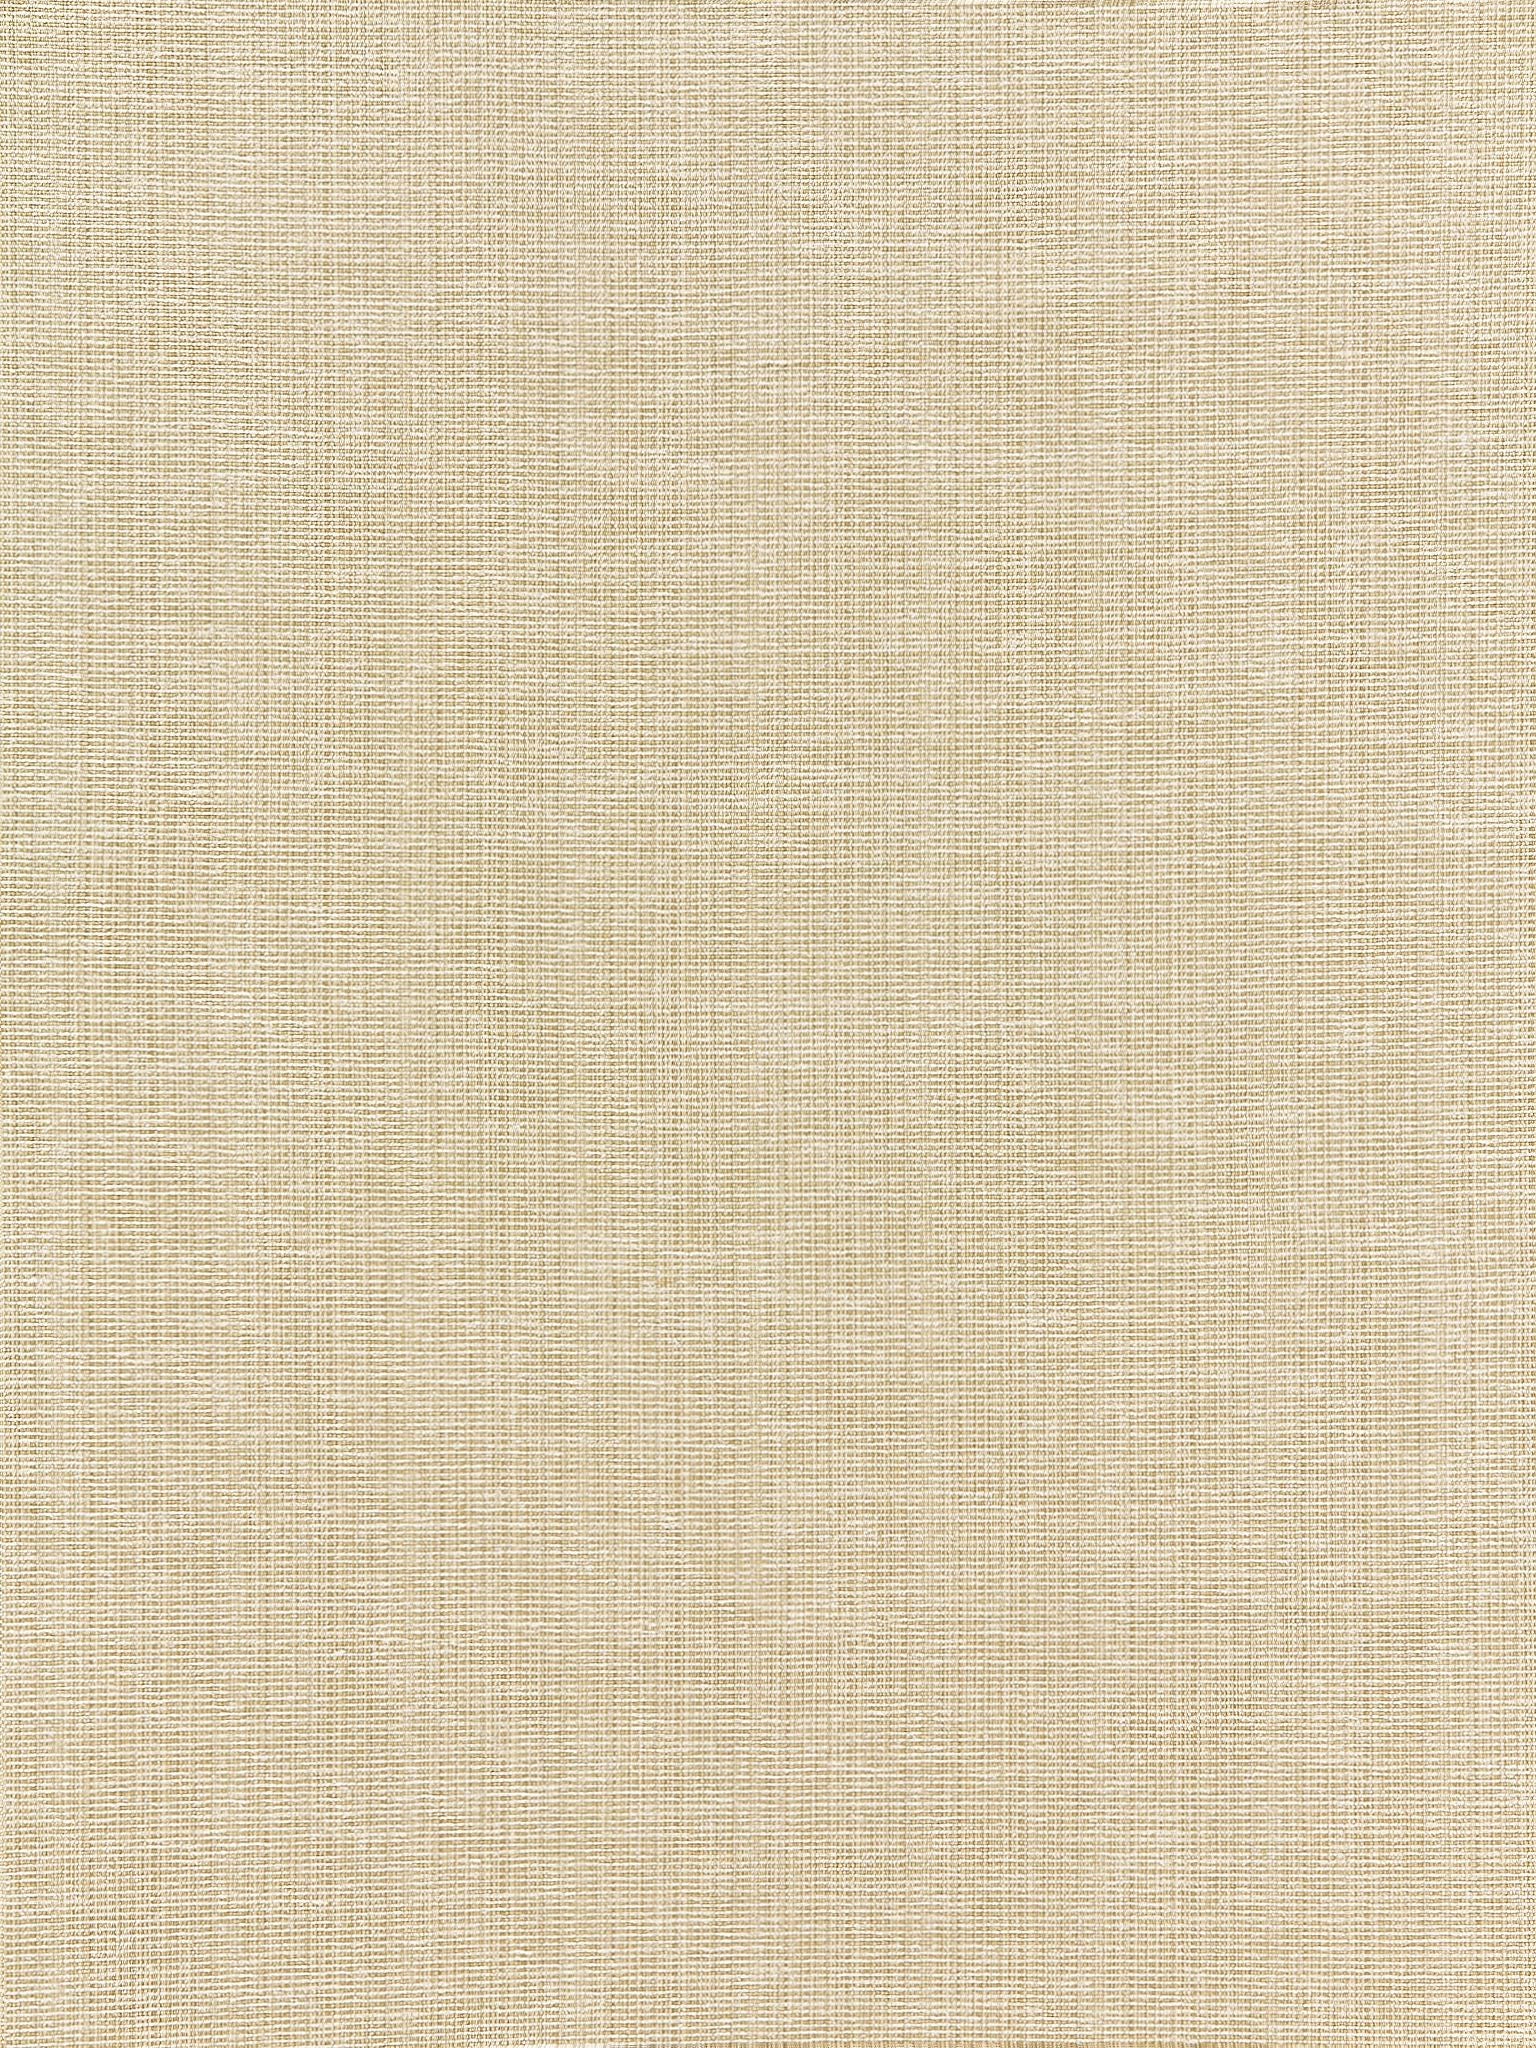 Thompson Chenille fabric in wheat color - pattern number BK 0002K65114 - by Scalamandre in the Old World Weavers collection